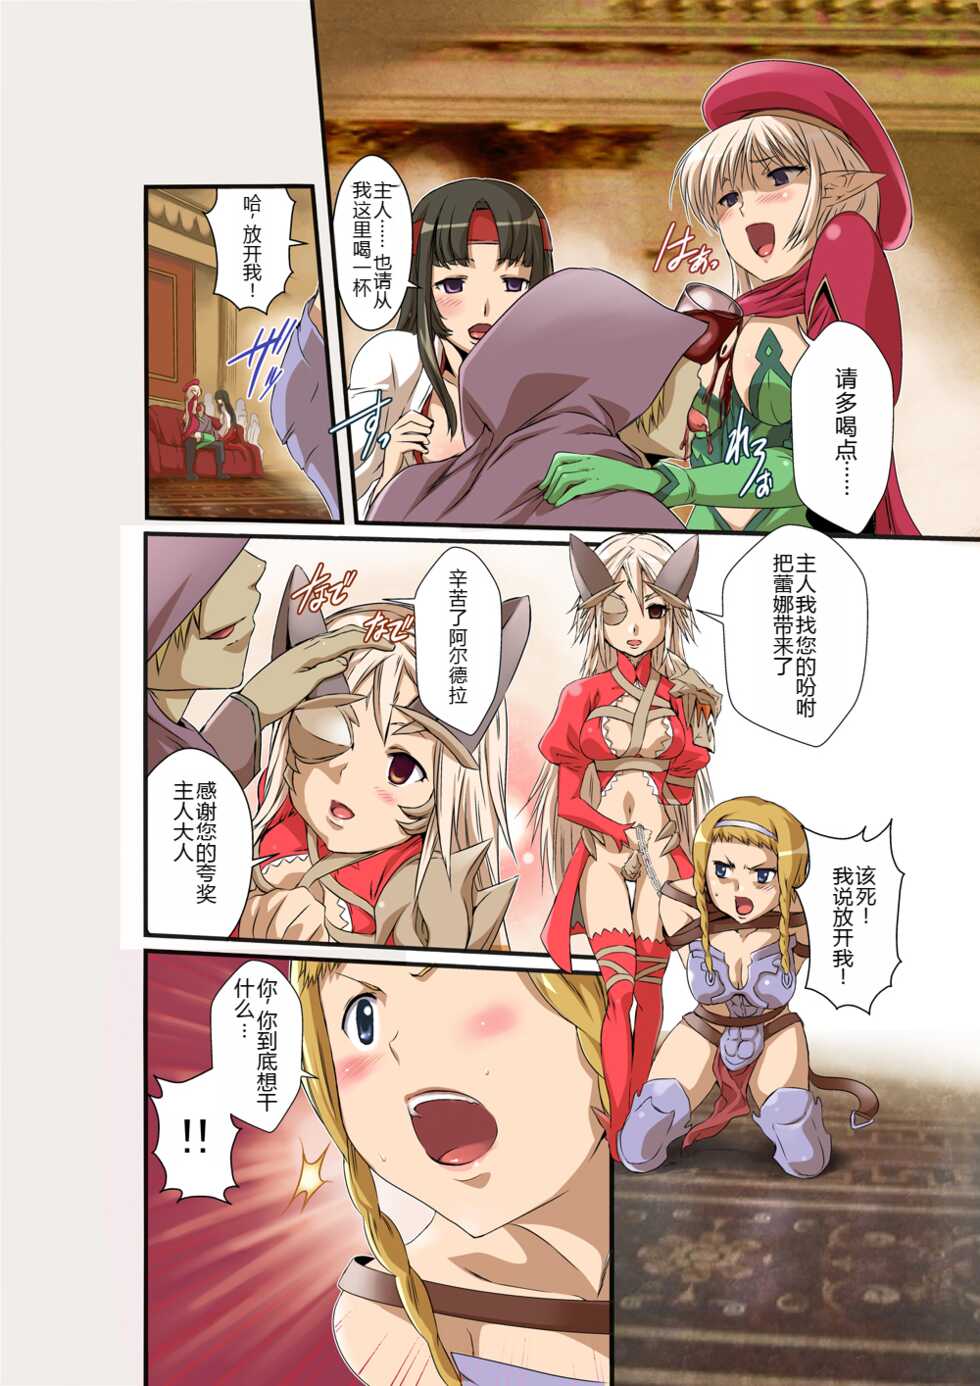 [Utsuro na Hitomi] Queen's *lade Mind-control Manga (Queen's Blade) [chinese] [lalala1234个人机翻汉化] - Page 20